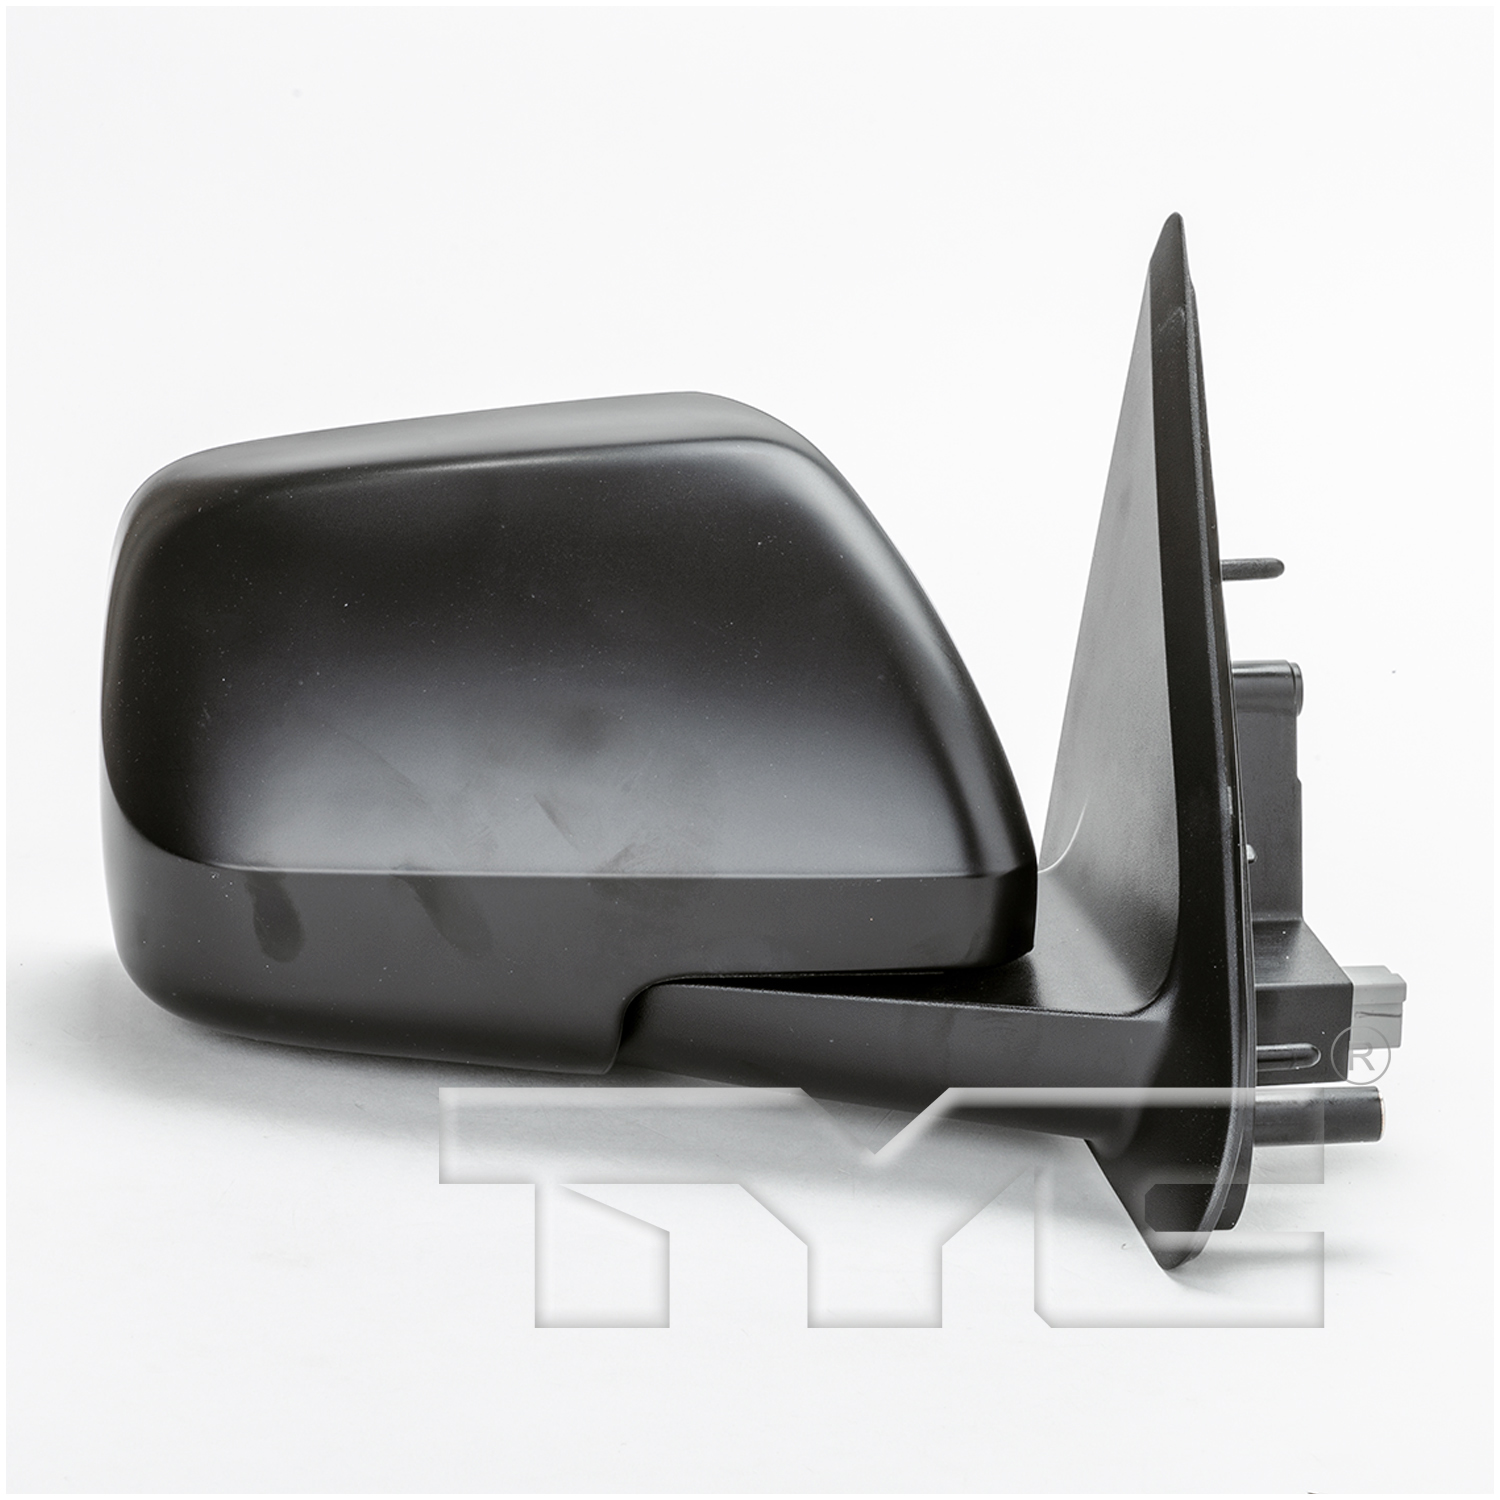 Aftermarket MIRRORS for FORD - ESCAPE, ESCAPE,08-09,RT Mirror outside rear view